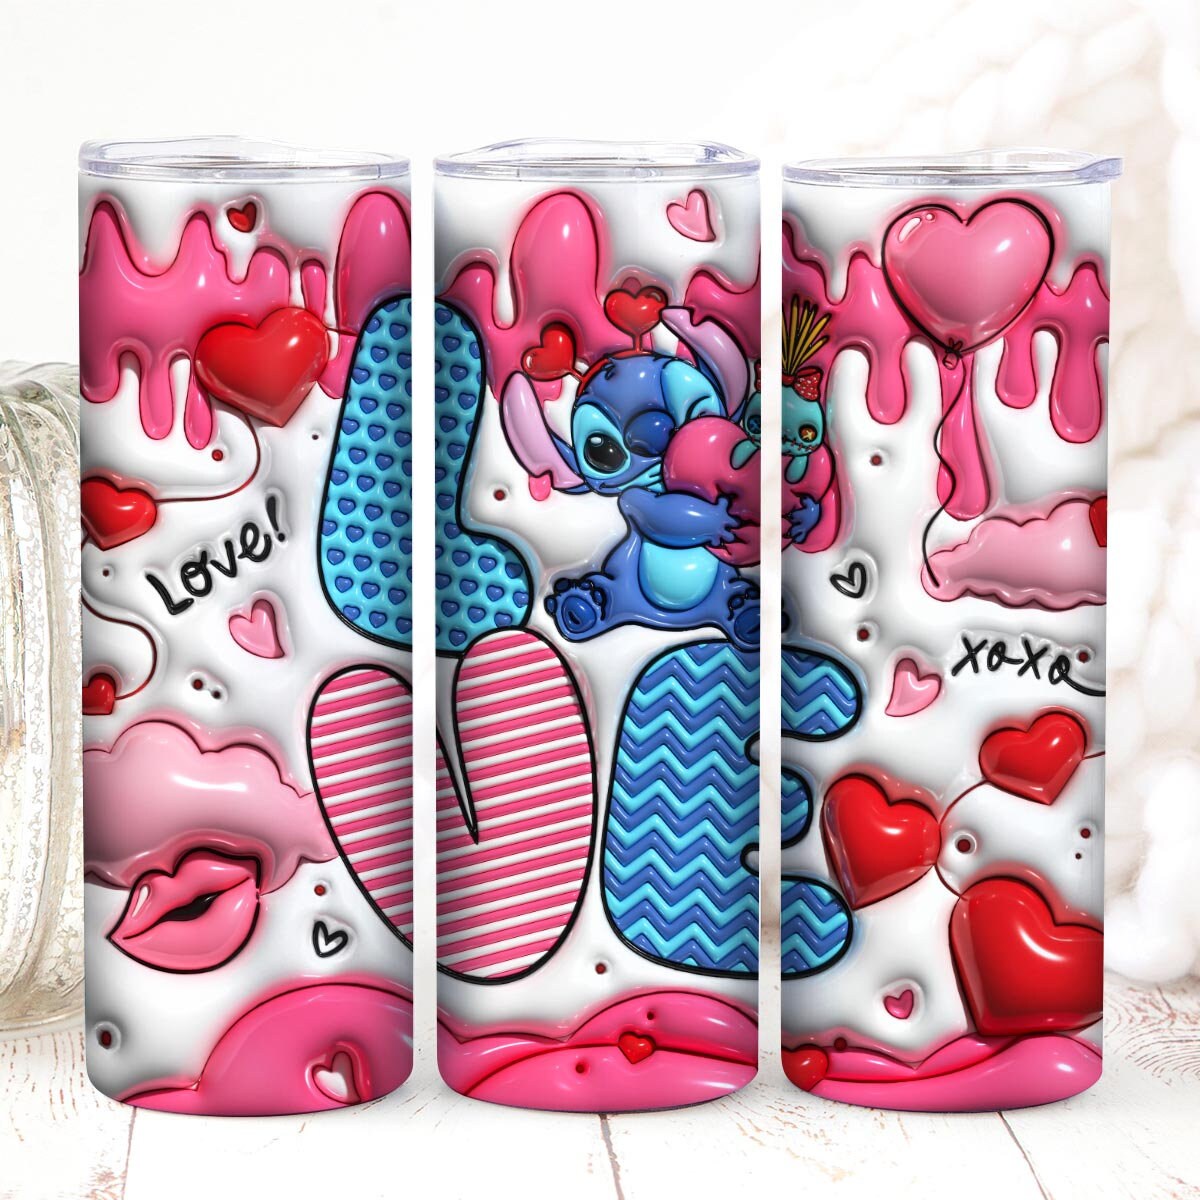 3D Inflated Stitch Valentine Tumbler PNG, 3D Stitch Inflated Valentine Tumbler Wraps, Stitch Love Tumbler Wrap, Valentine Tumbler Png - VartDigitals